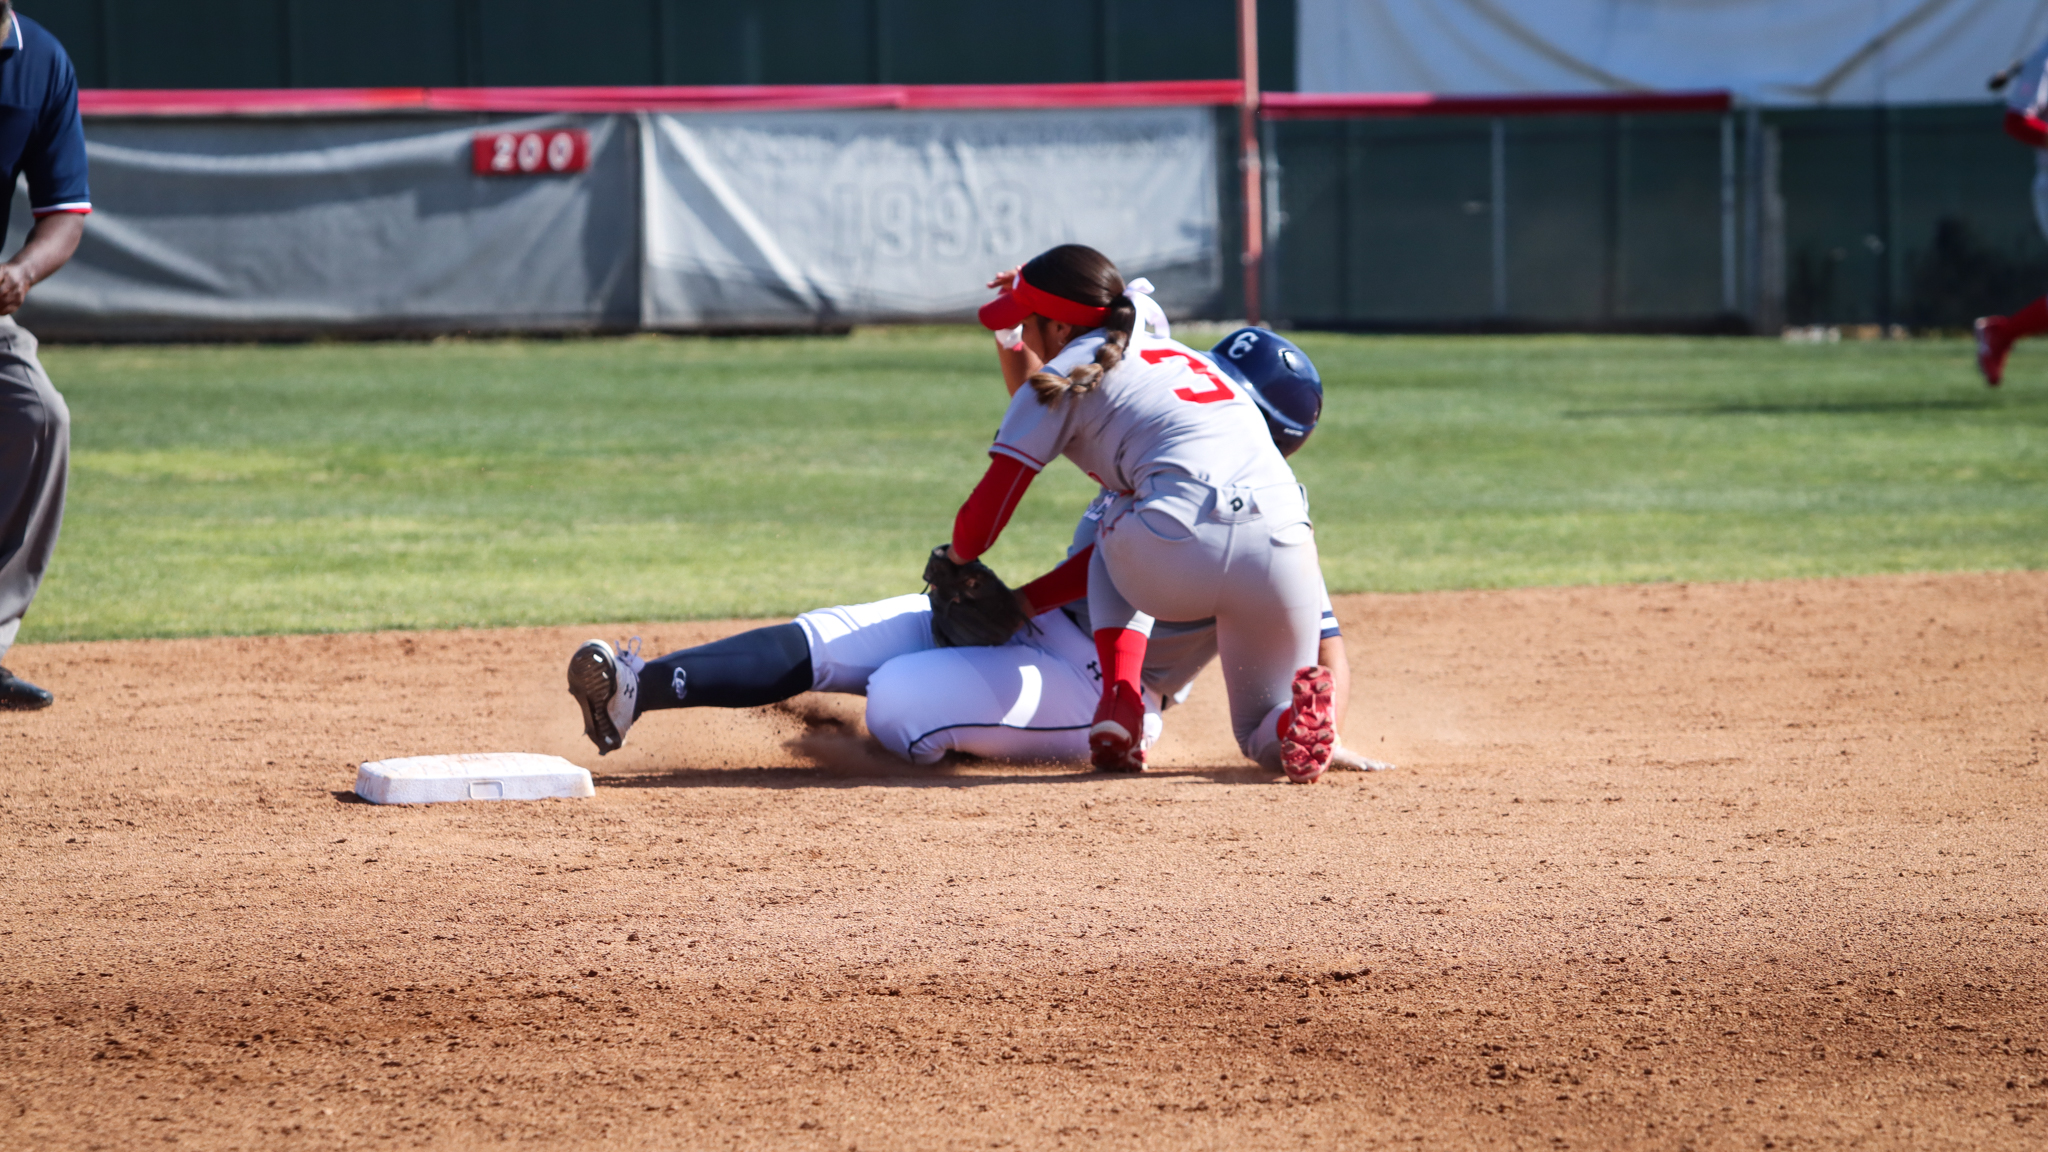 Samarah Martinez gets the runner out at second on a stolen base attempt against Cerritos College. Photo by Cara Heise.